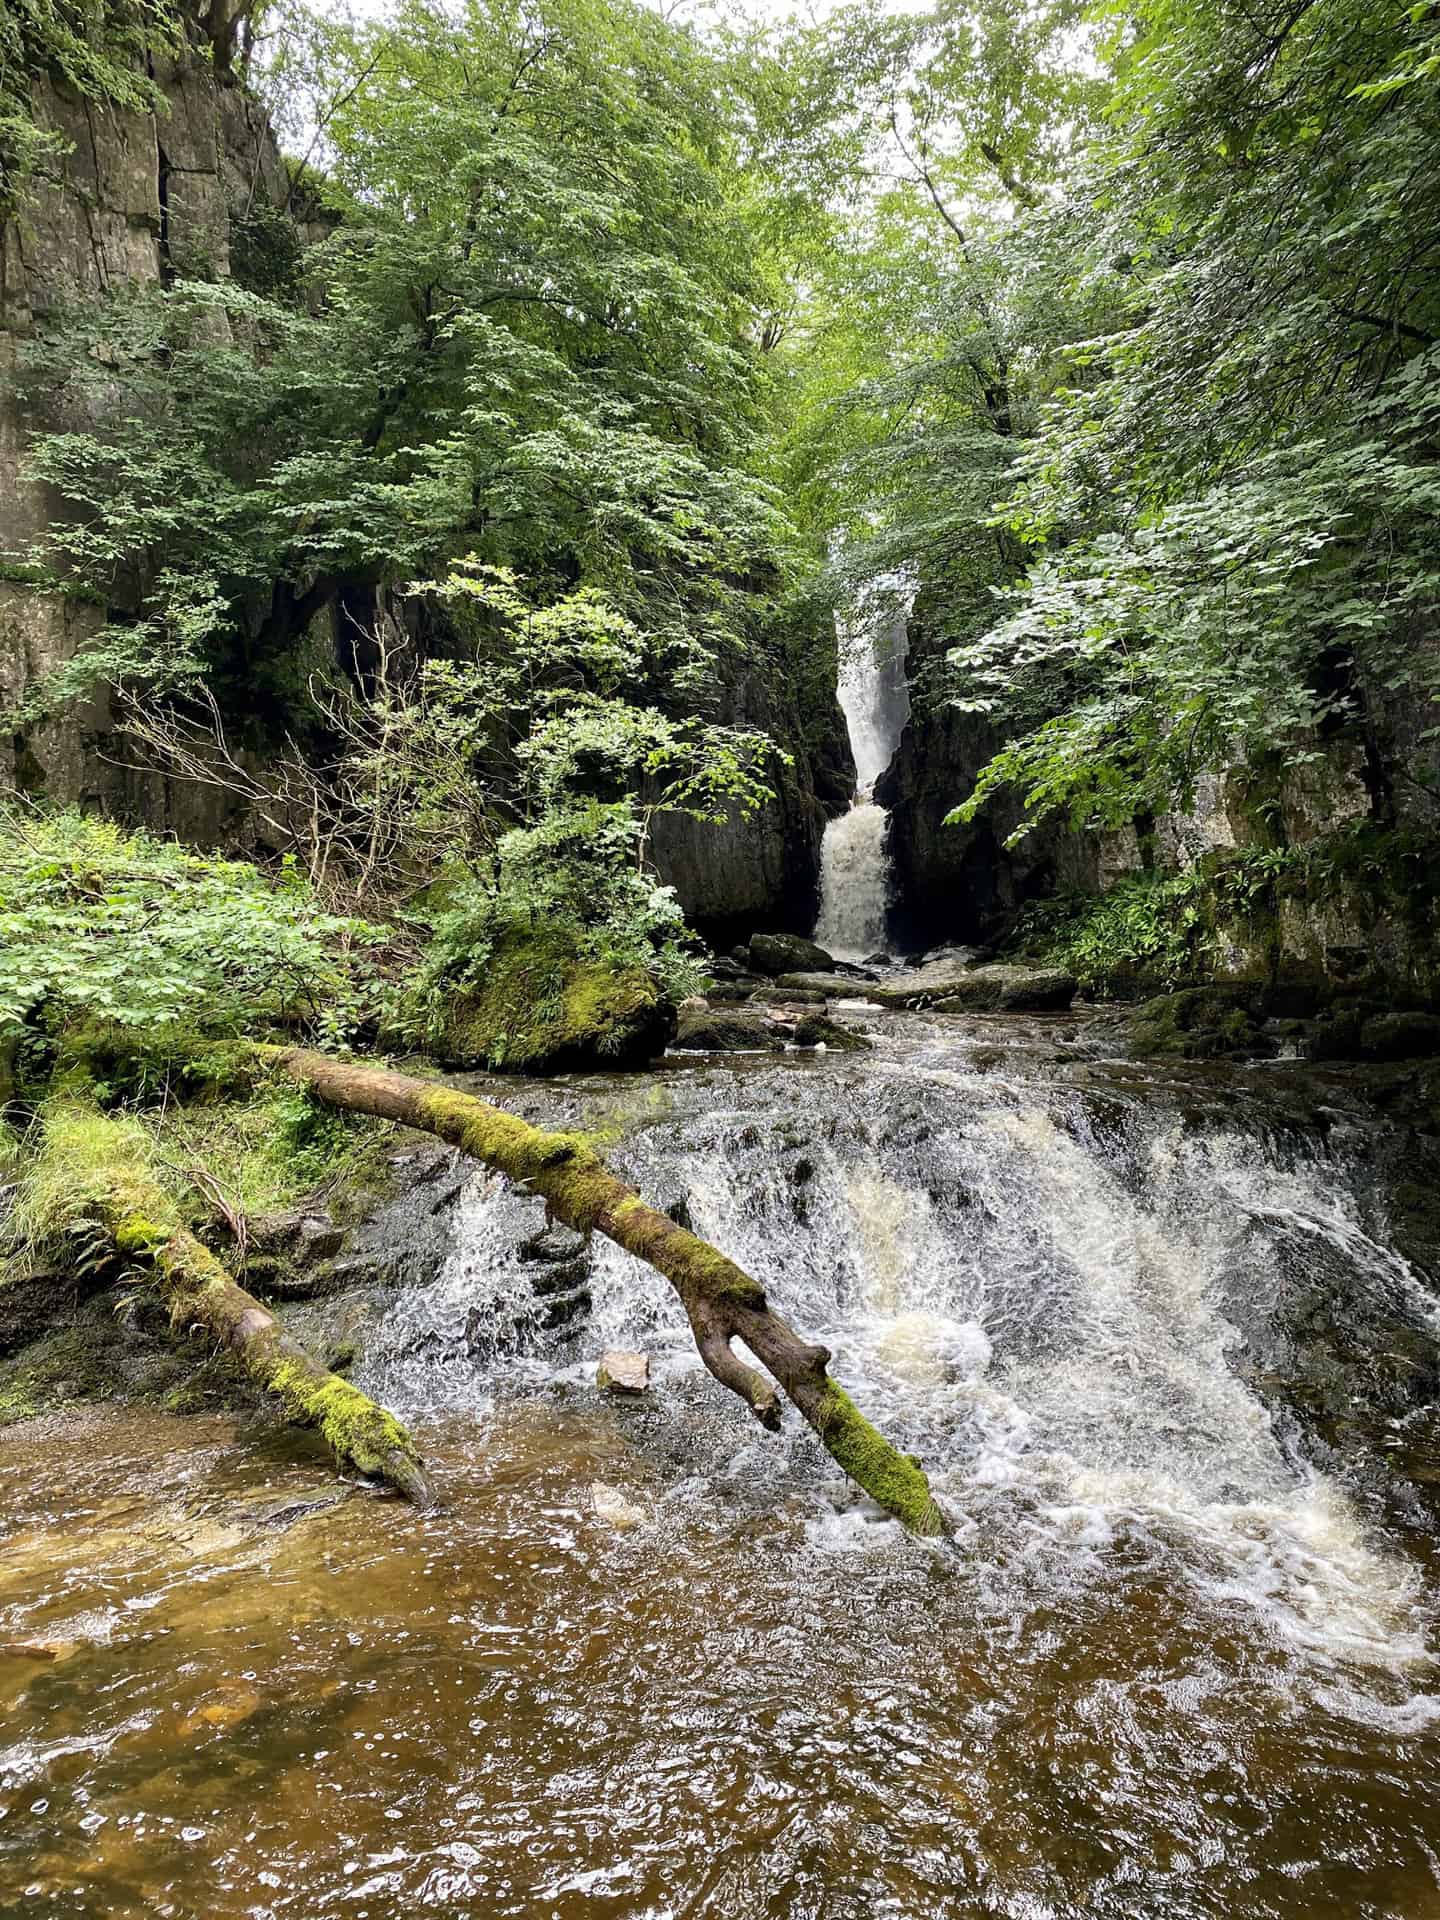 Catrigg Force (Waterfall) created by Stainforth Beck about a mile east of Stainforth.